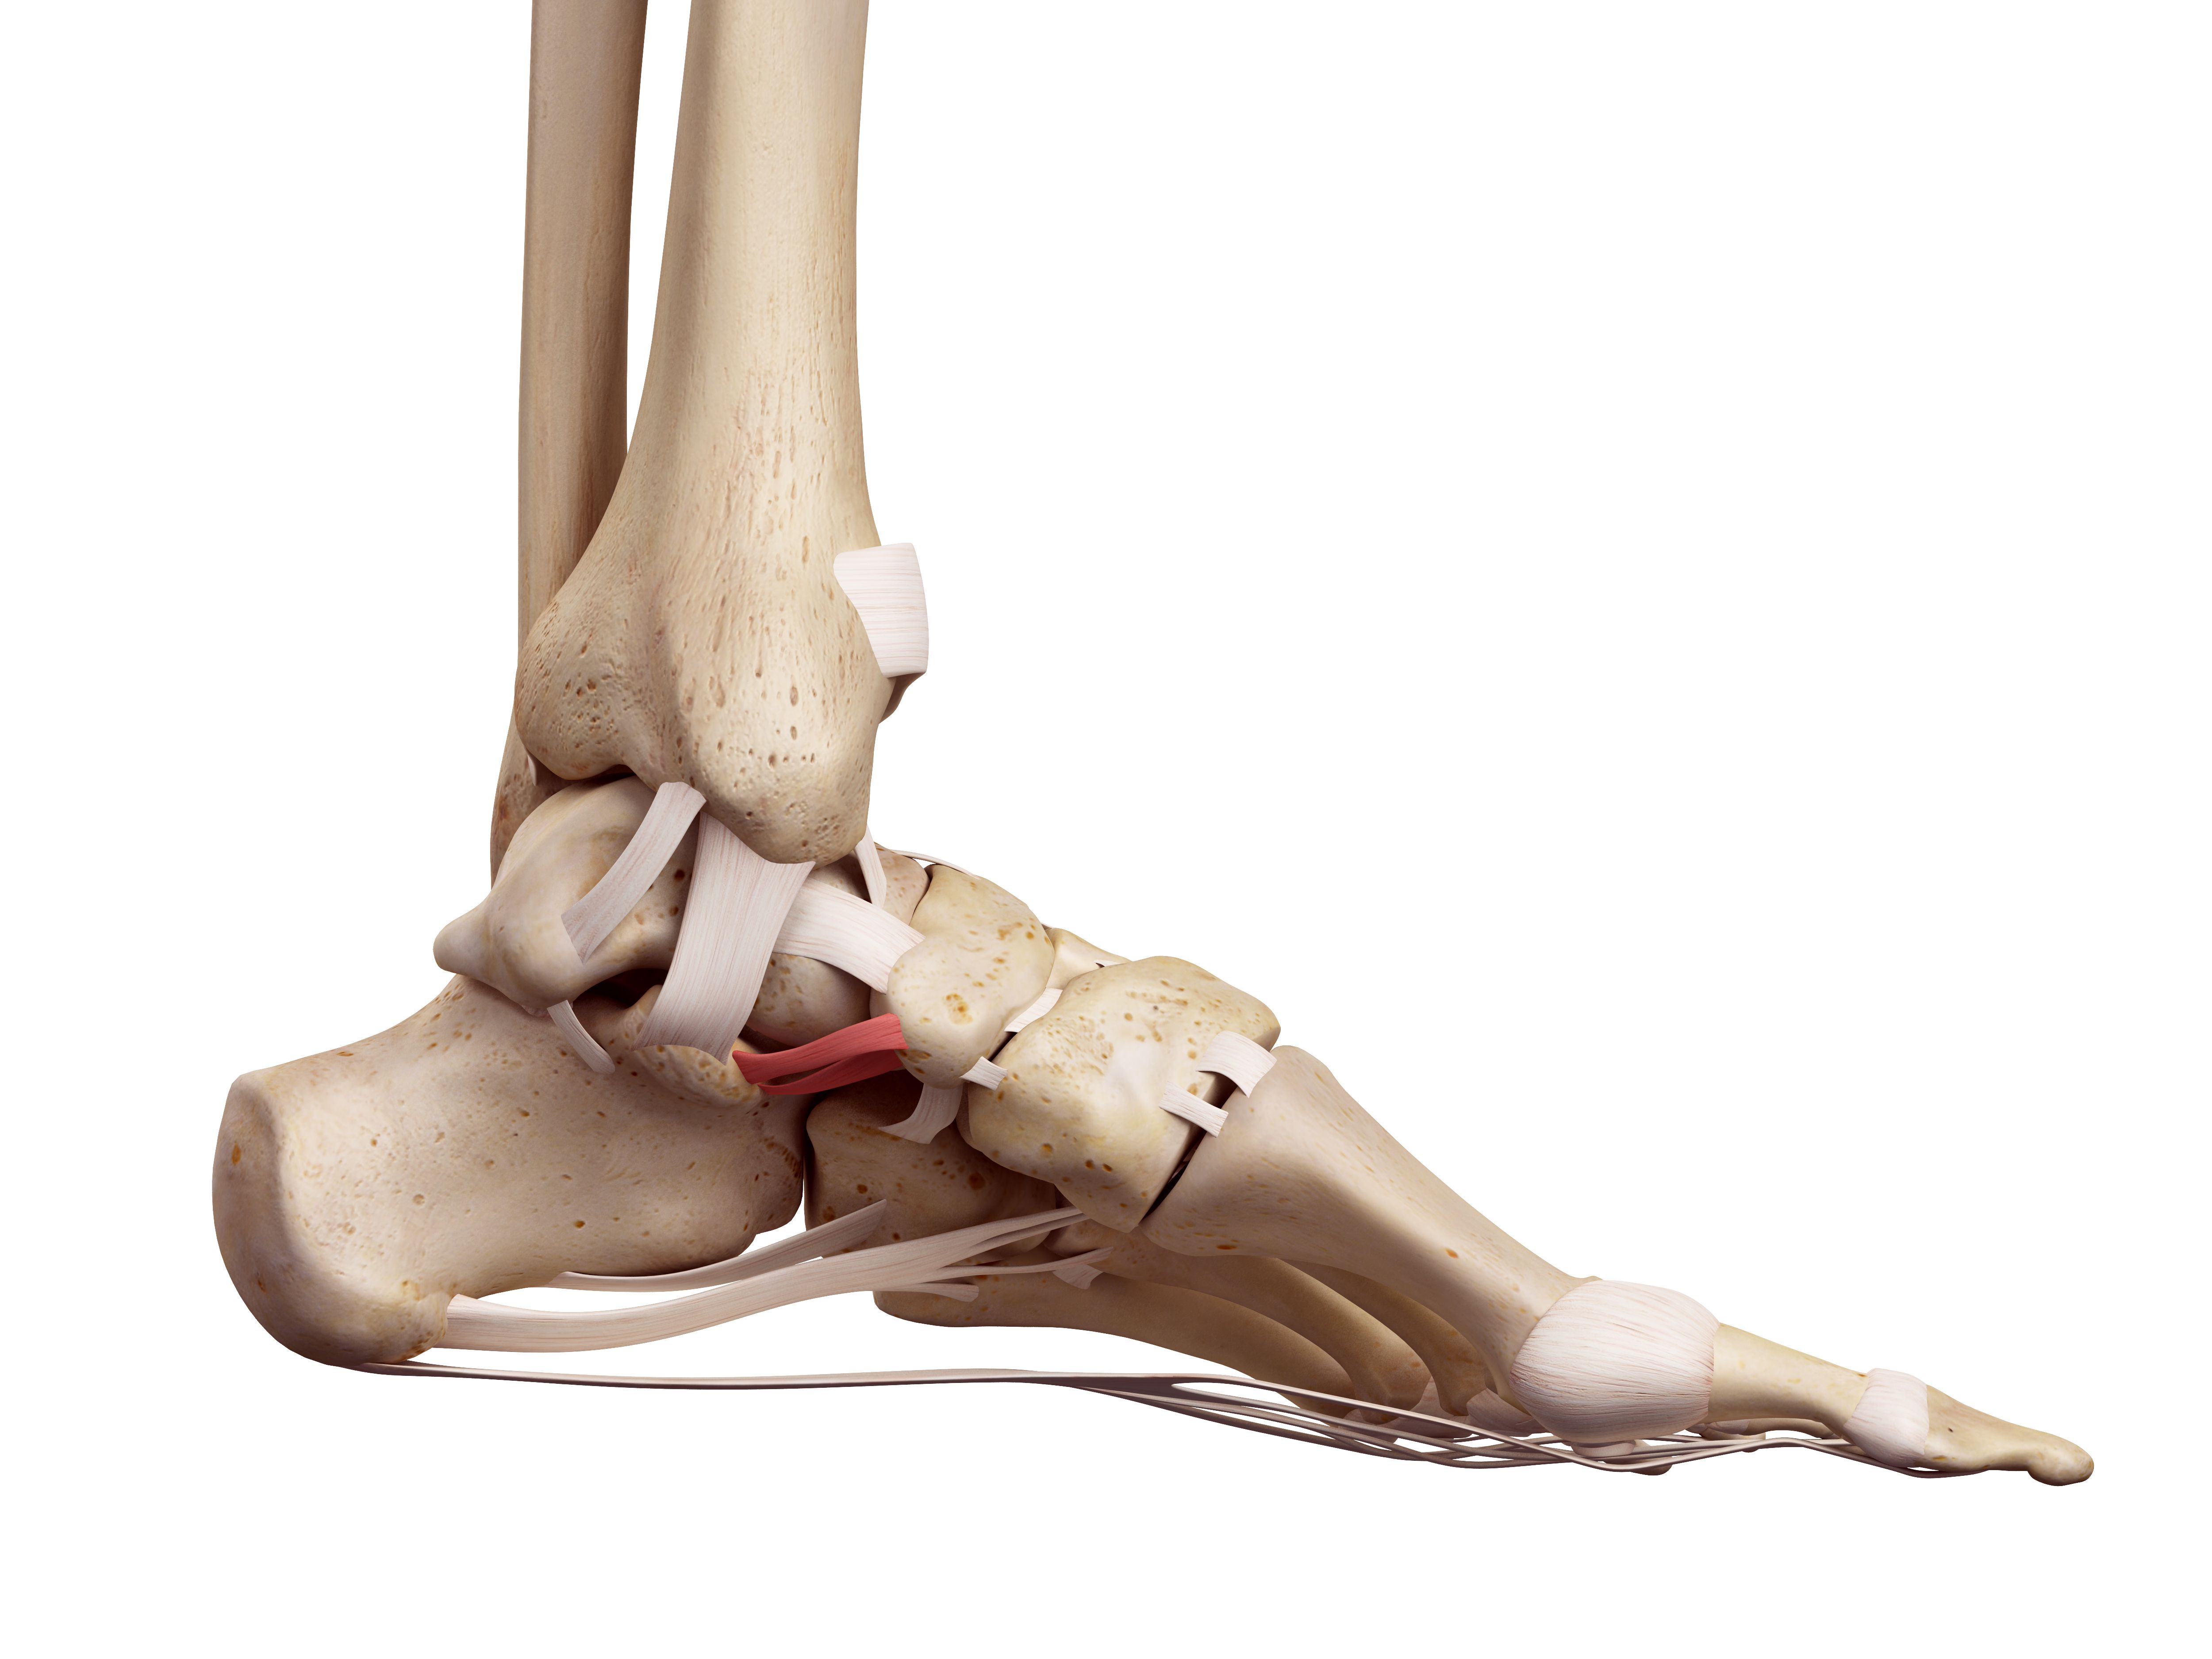 Heel pain and Rigidus | Shellharbour Podiatry | Your Local Podiatrists